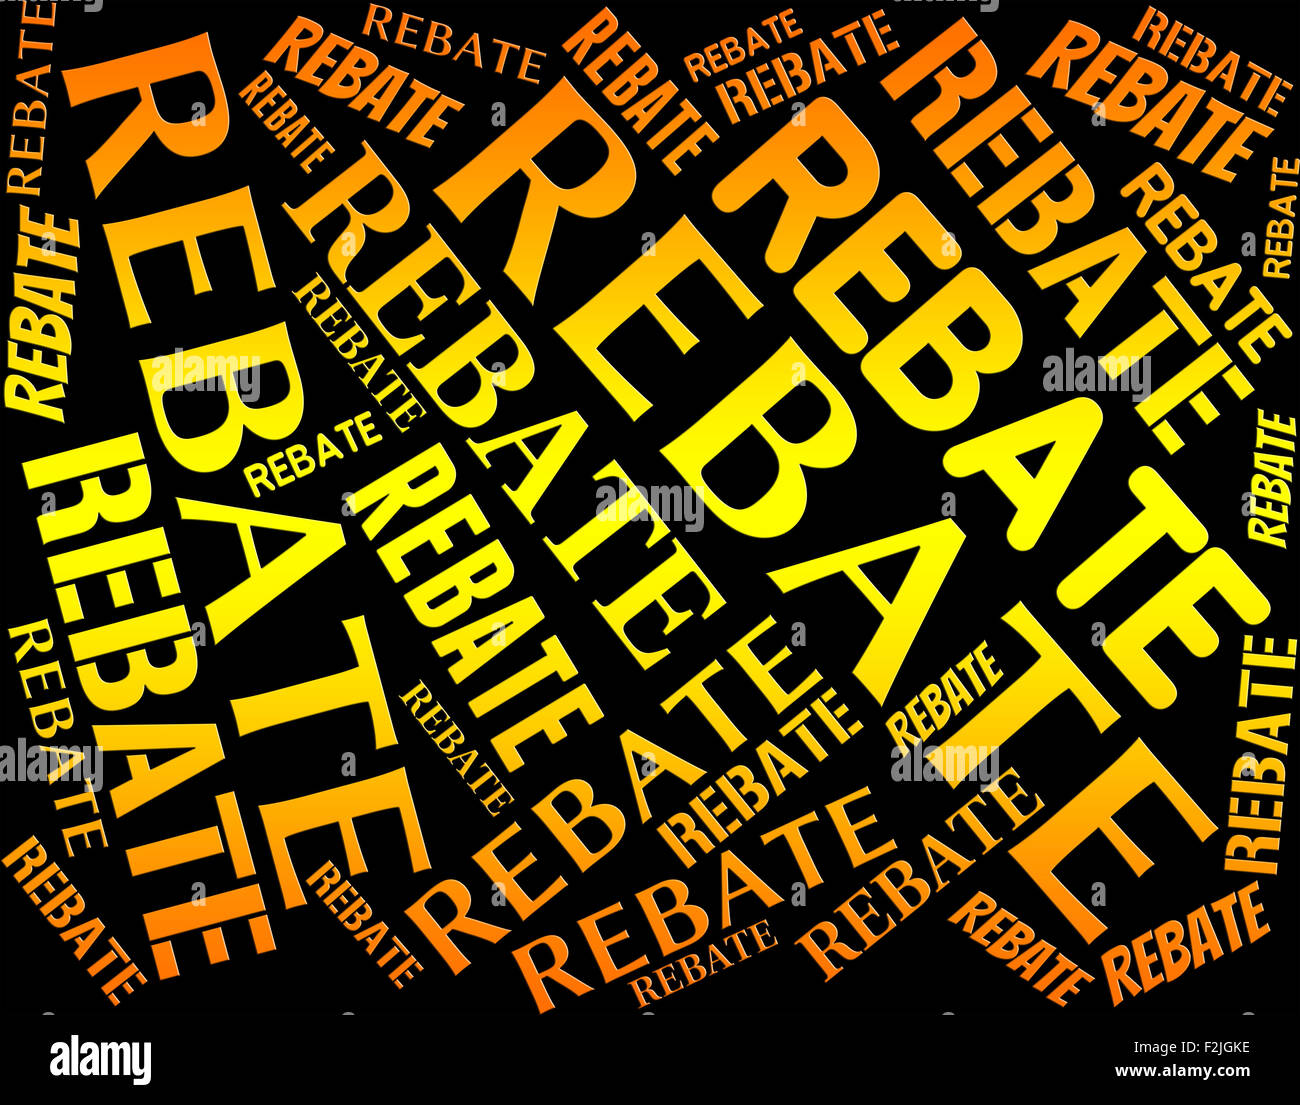 Rebate Word Showing Partial Refund And Text Stock Photo Alamy